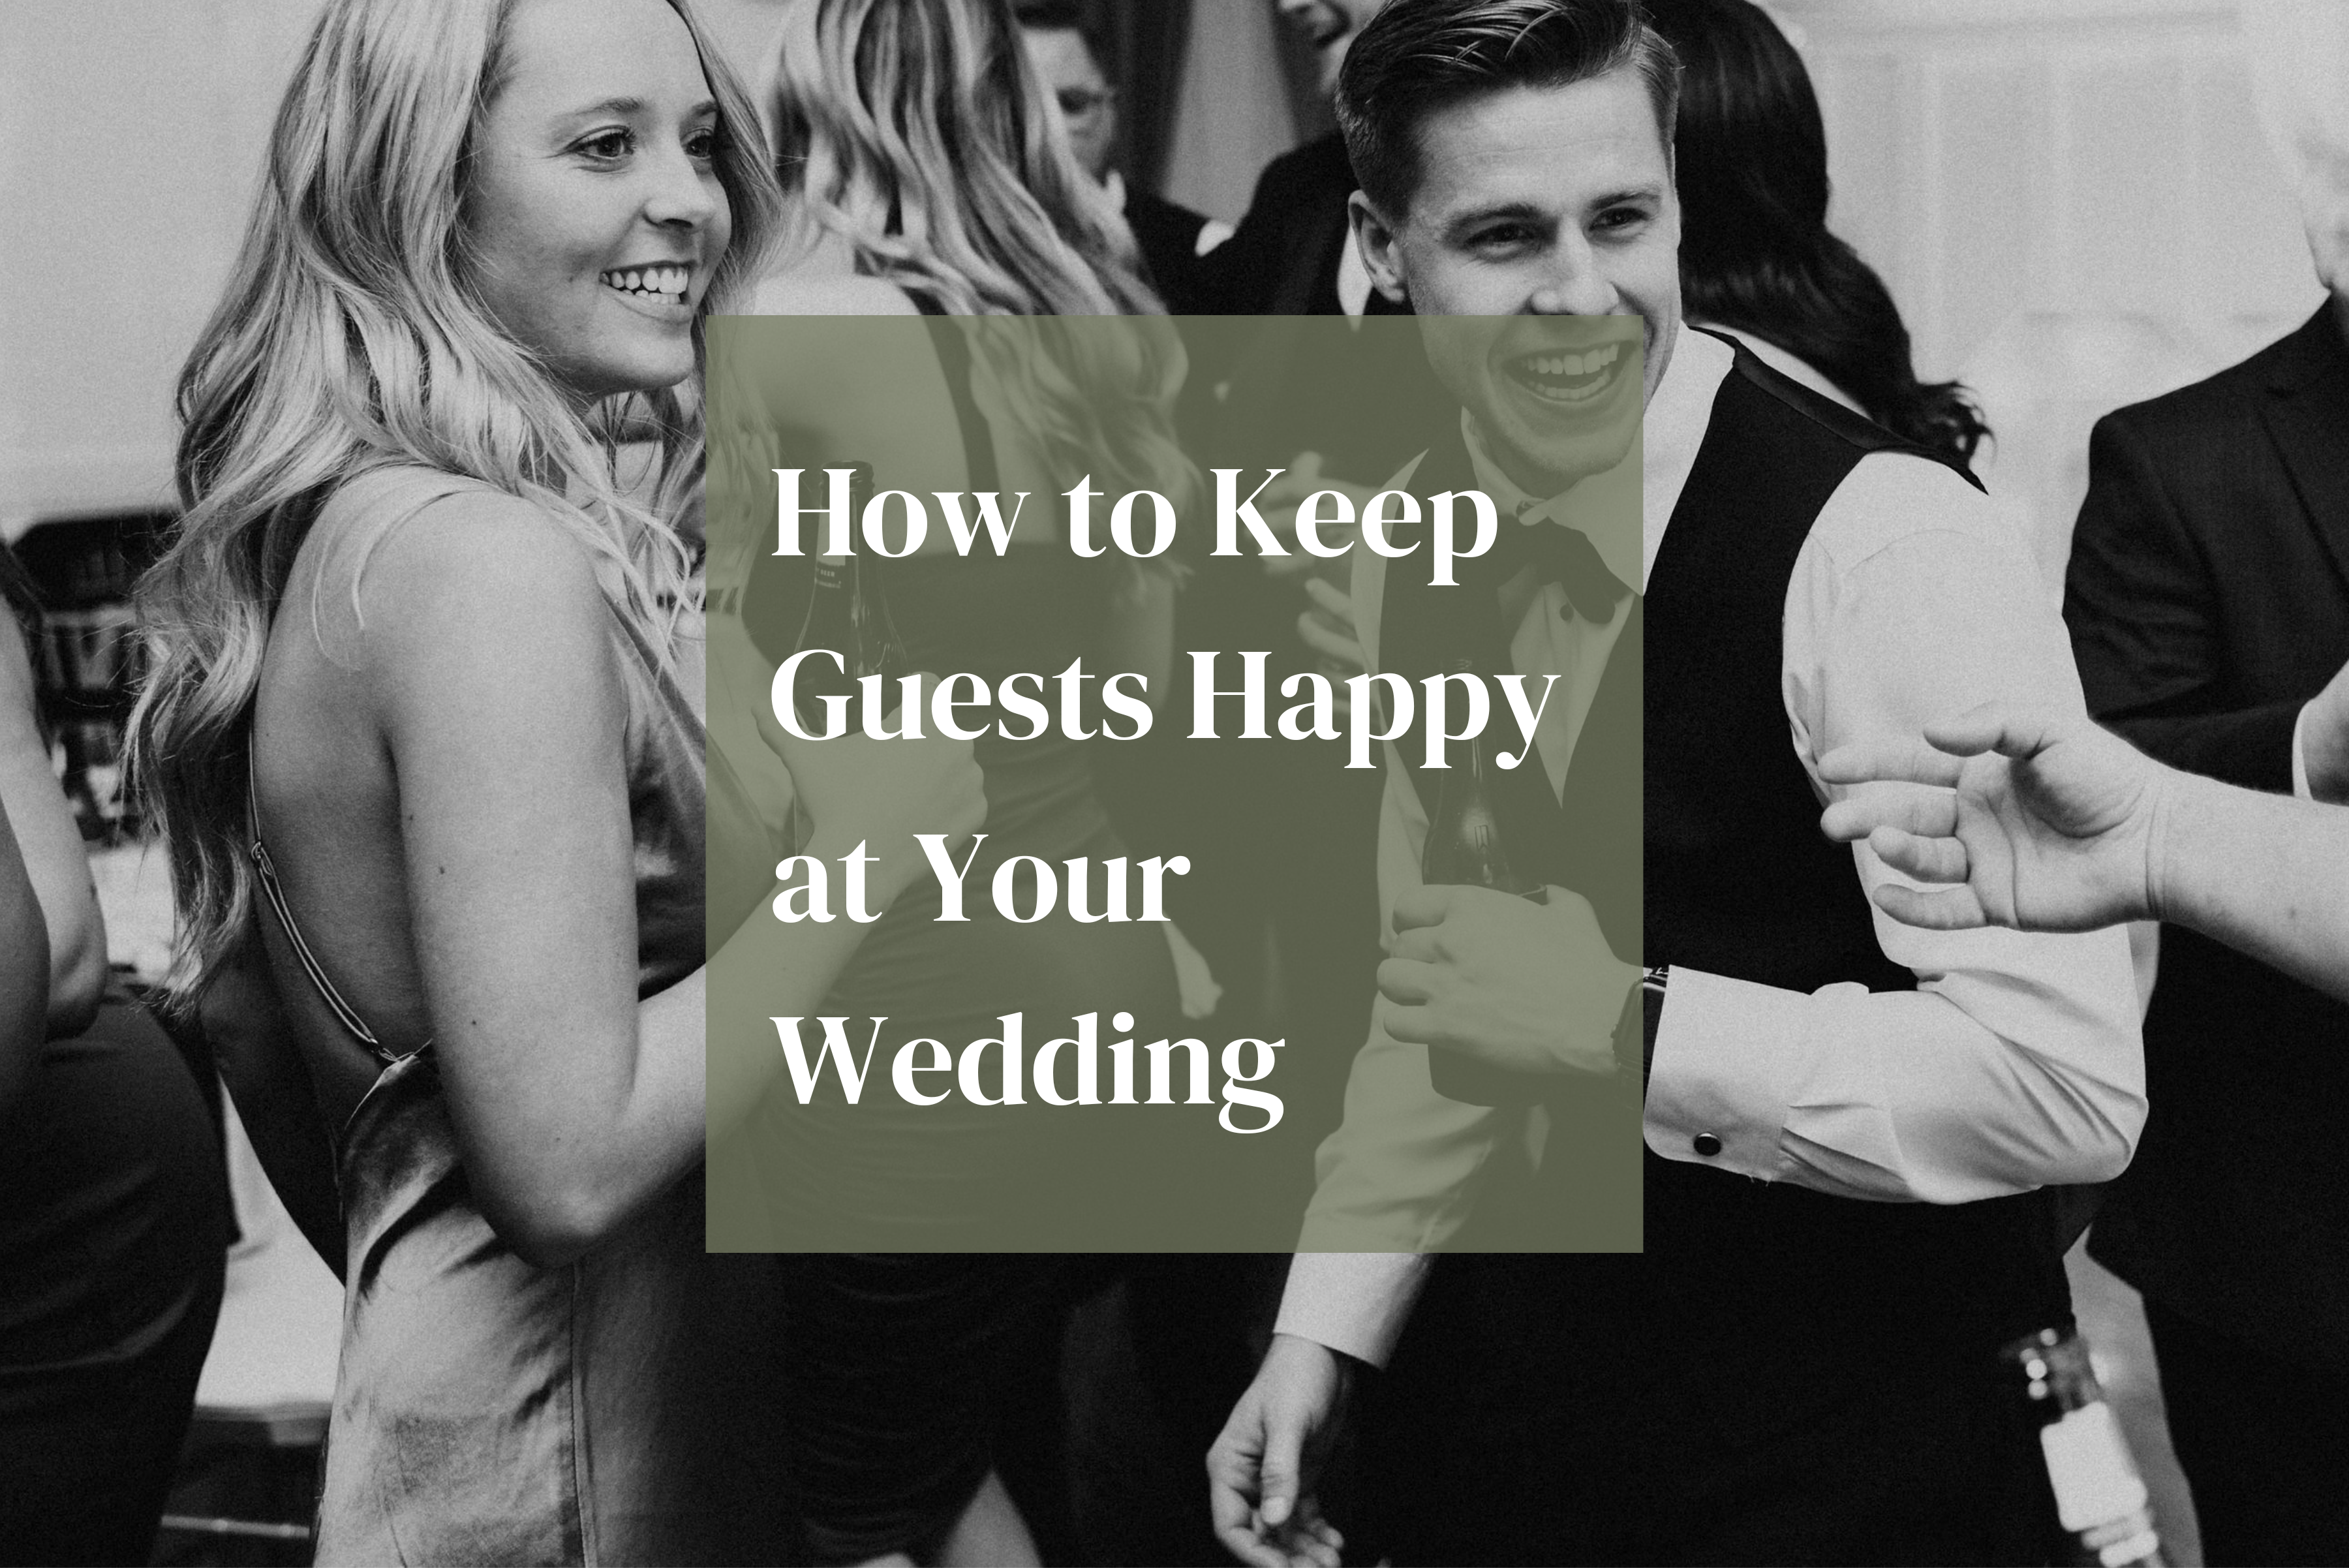 How to keep guests happy at your wedding